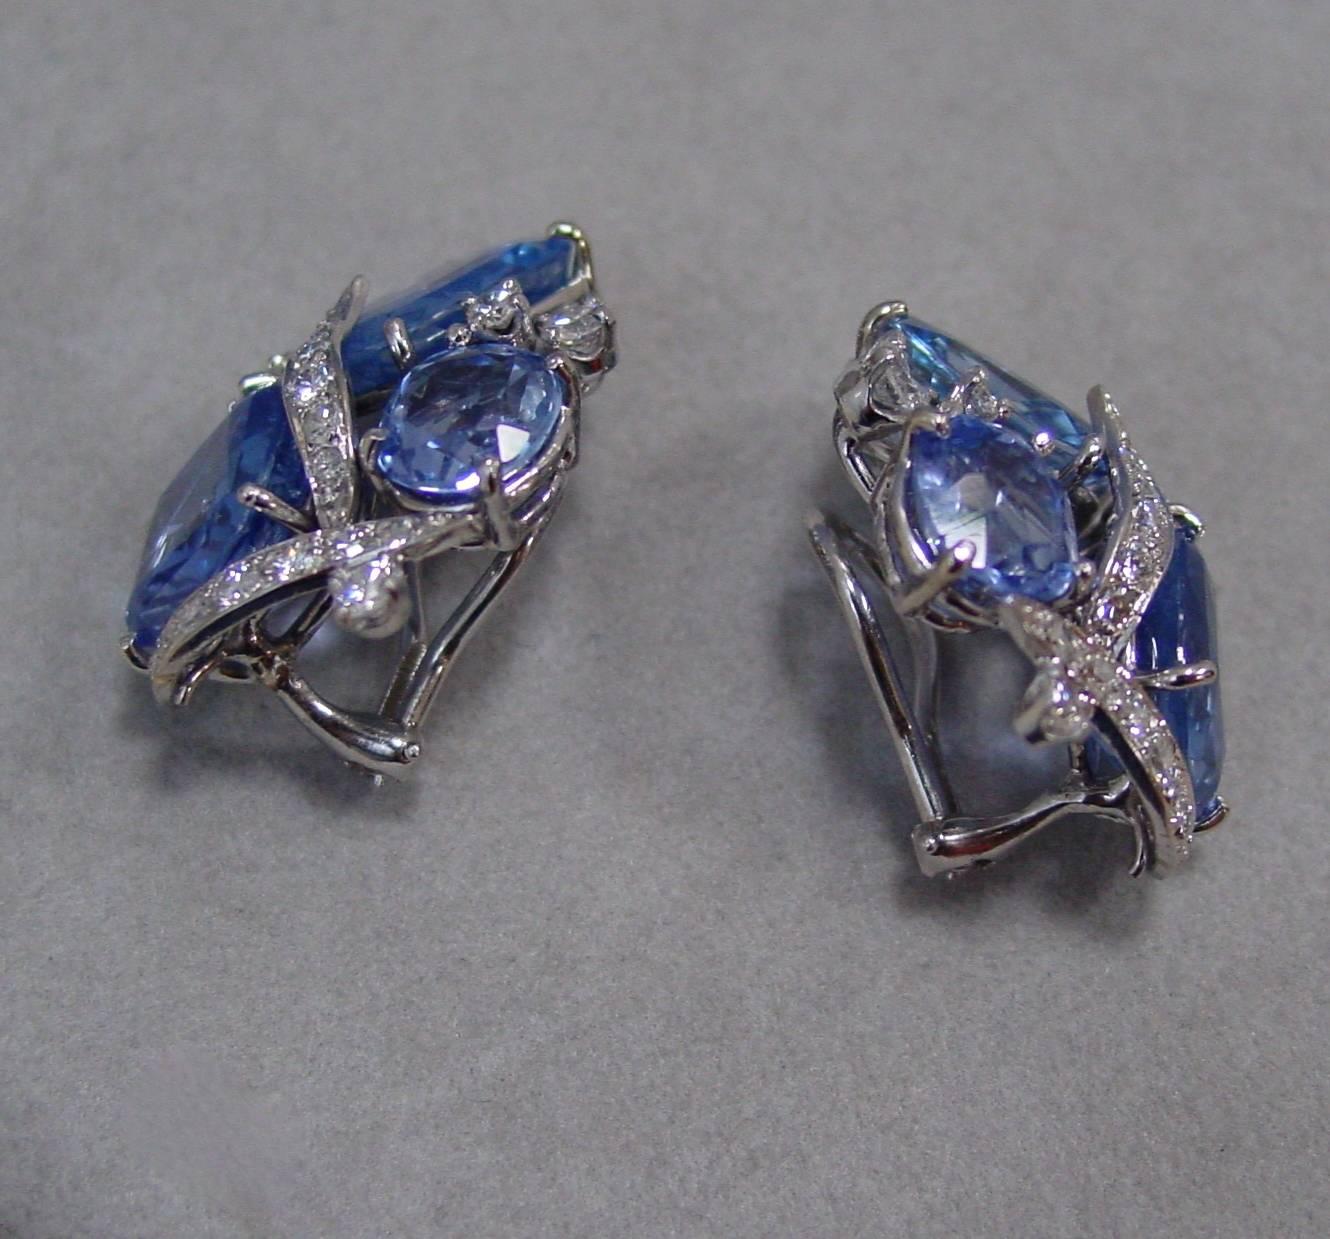 A Pair of Cushion Shaped Sapphire and Diamond Cluster Earrings Mounted in 18 Karat White Gold. Set with 33.58 carats of gorgeous antique cushion shaped sapphires beautifully highlighted by 18 karat white gold and diamonds, these ear clips are simply